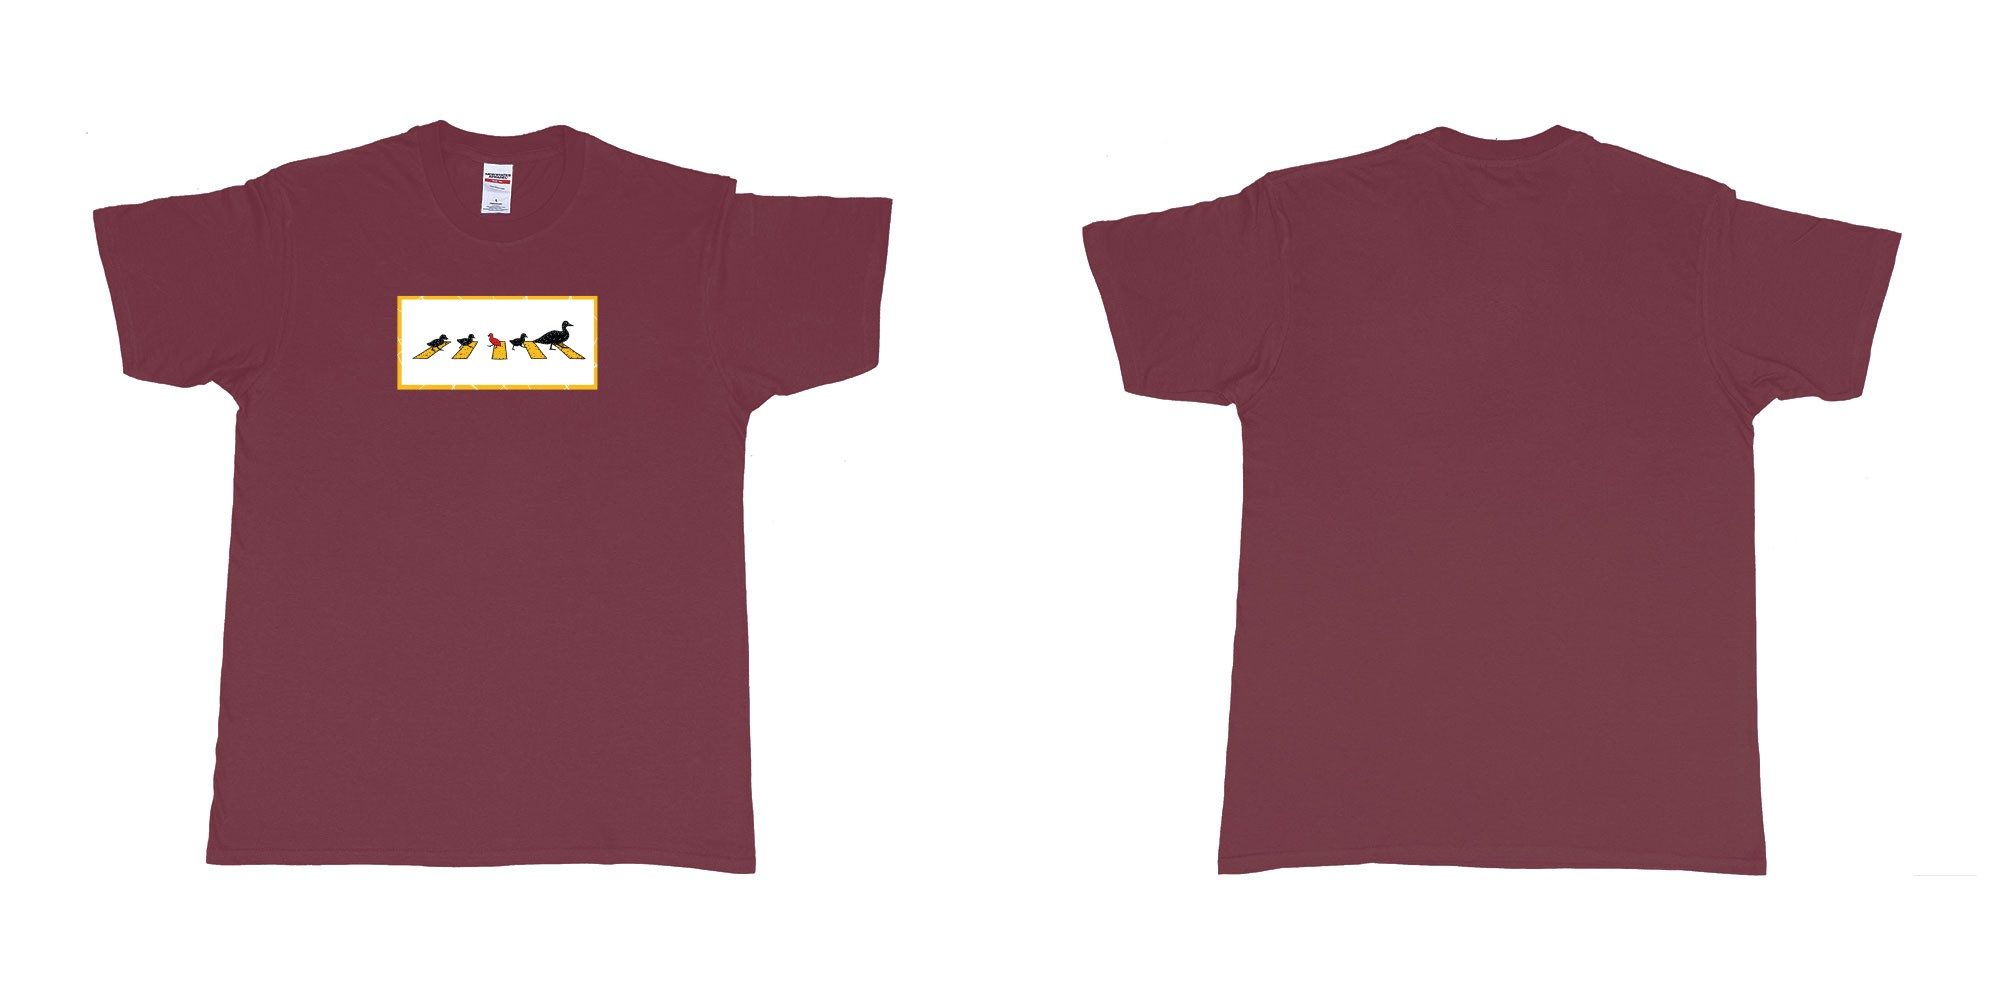 Custom tshirt design 4481 ducks in fabric color marron choice your own text made in Bali by The Pirate Way